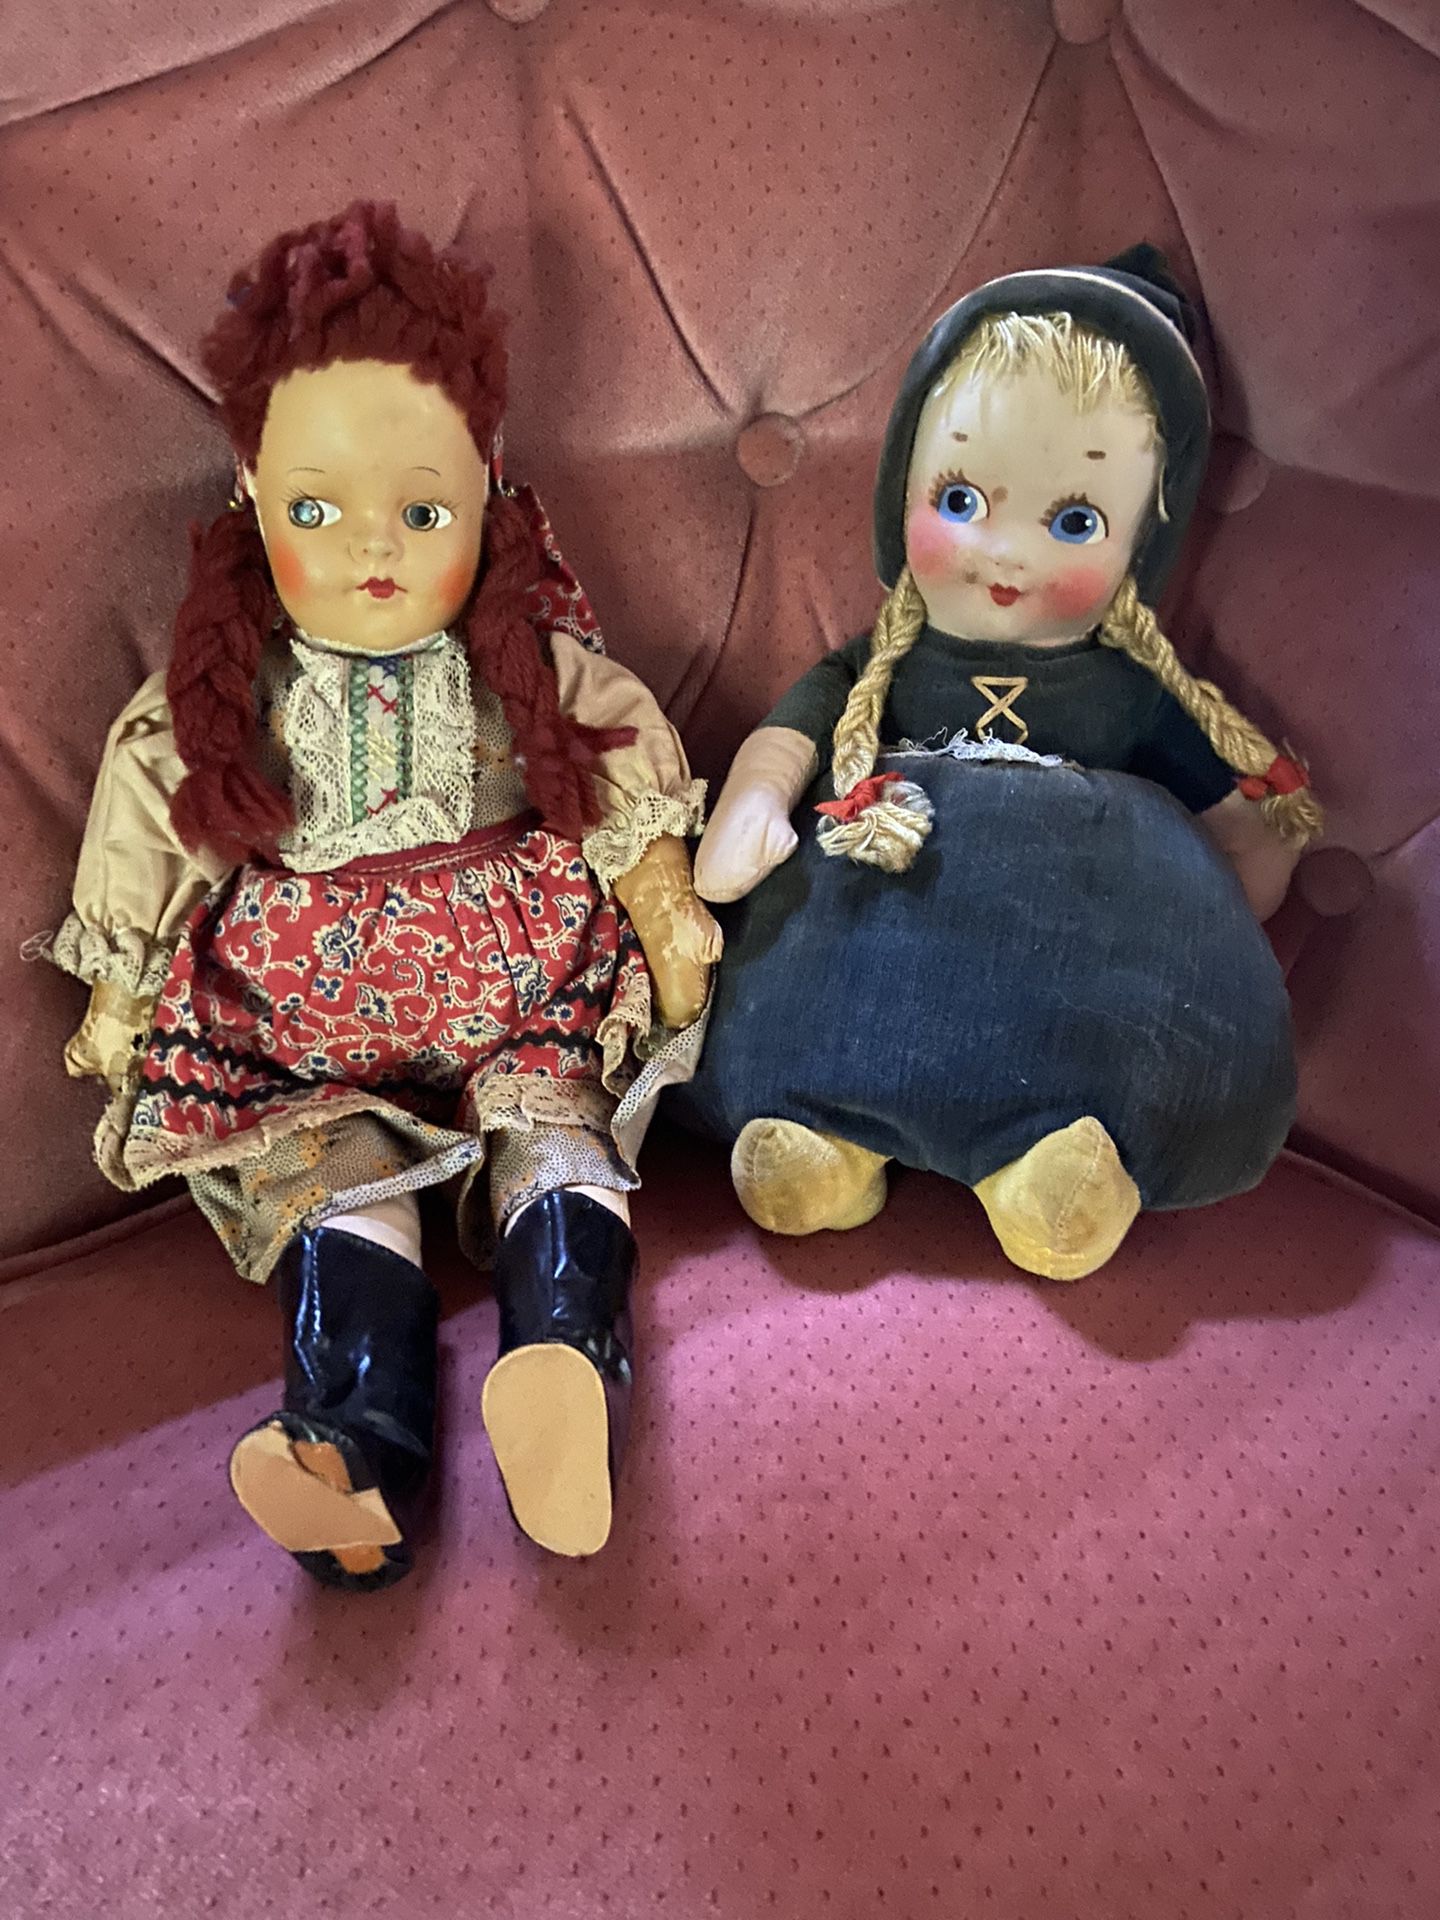 Antique Dolls (14 1/2” and 11”)